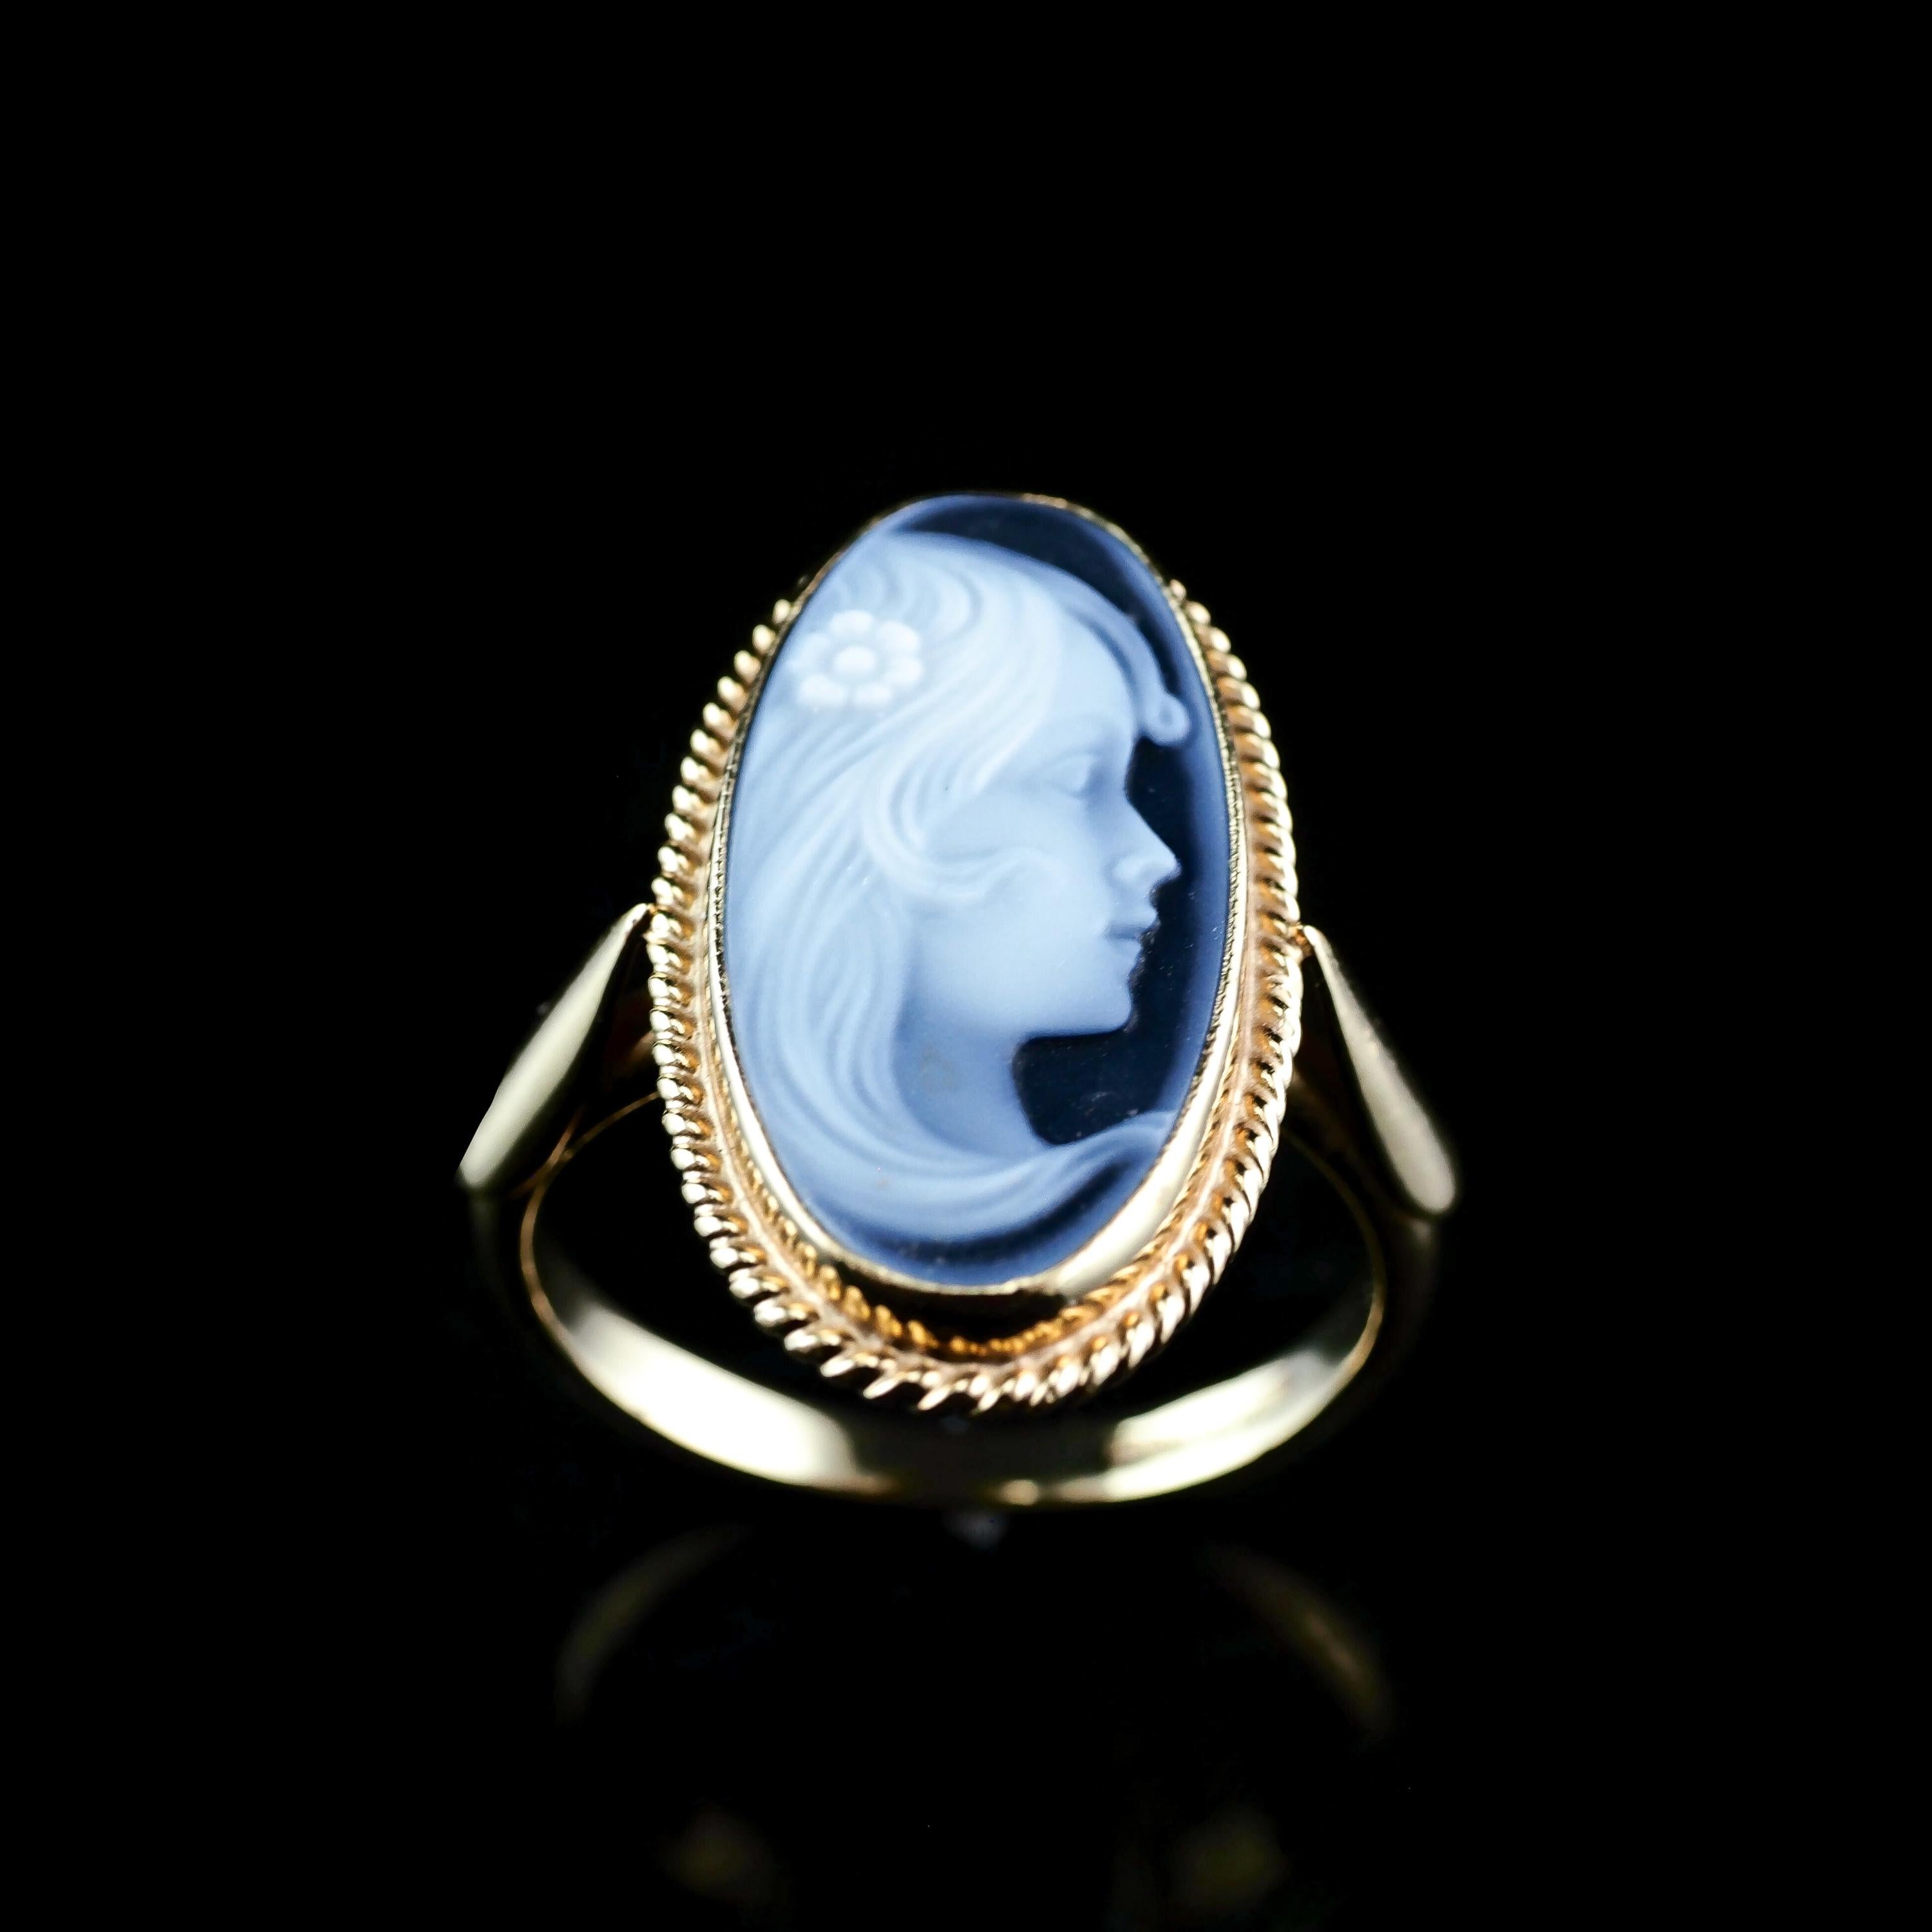 9 Carat Gold Agate Cameo Ring with Beautiful Figural Maiden Head 3